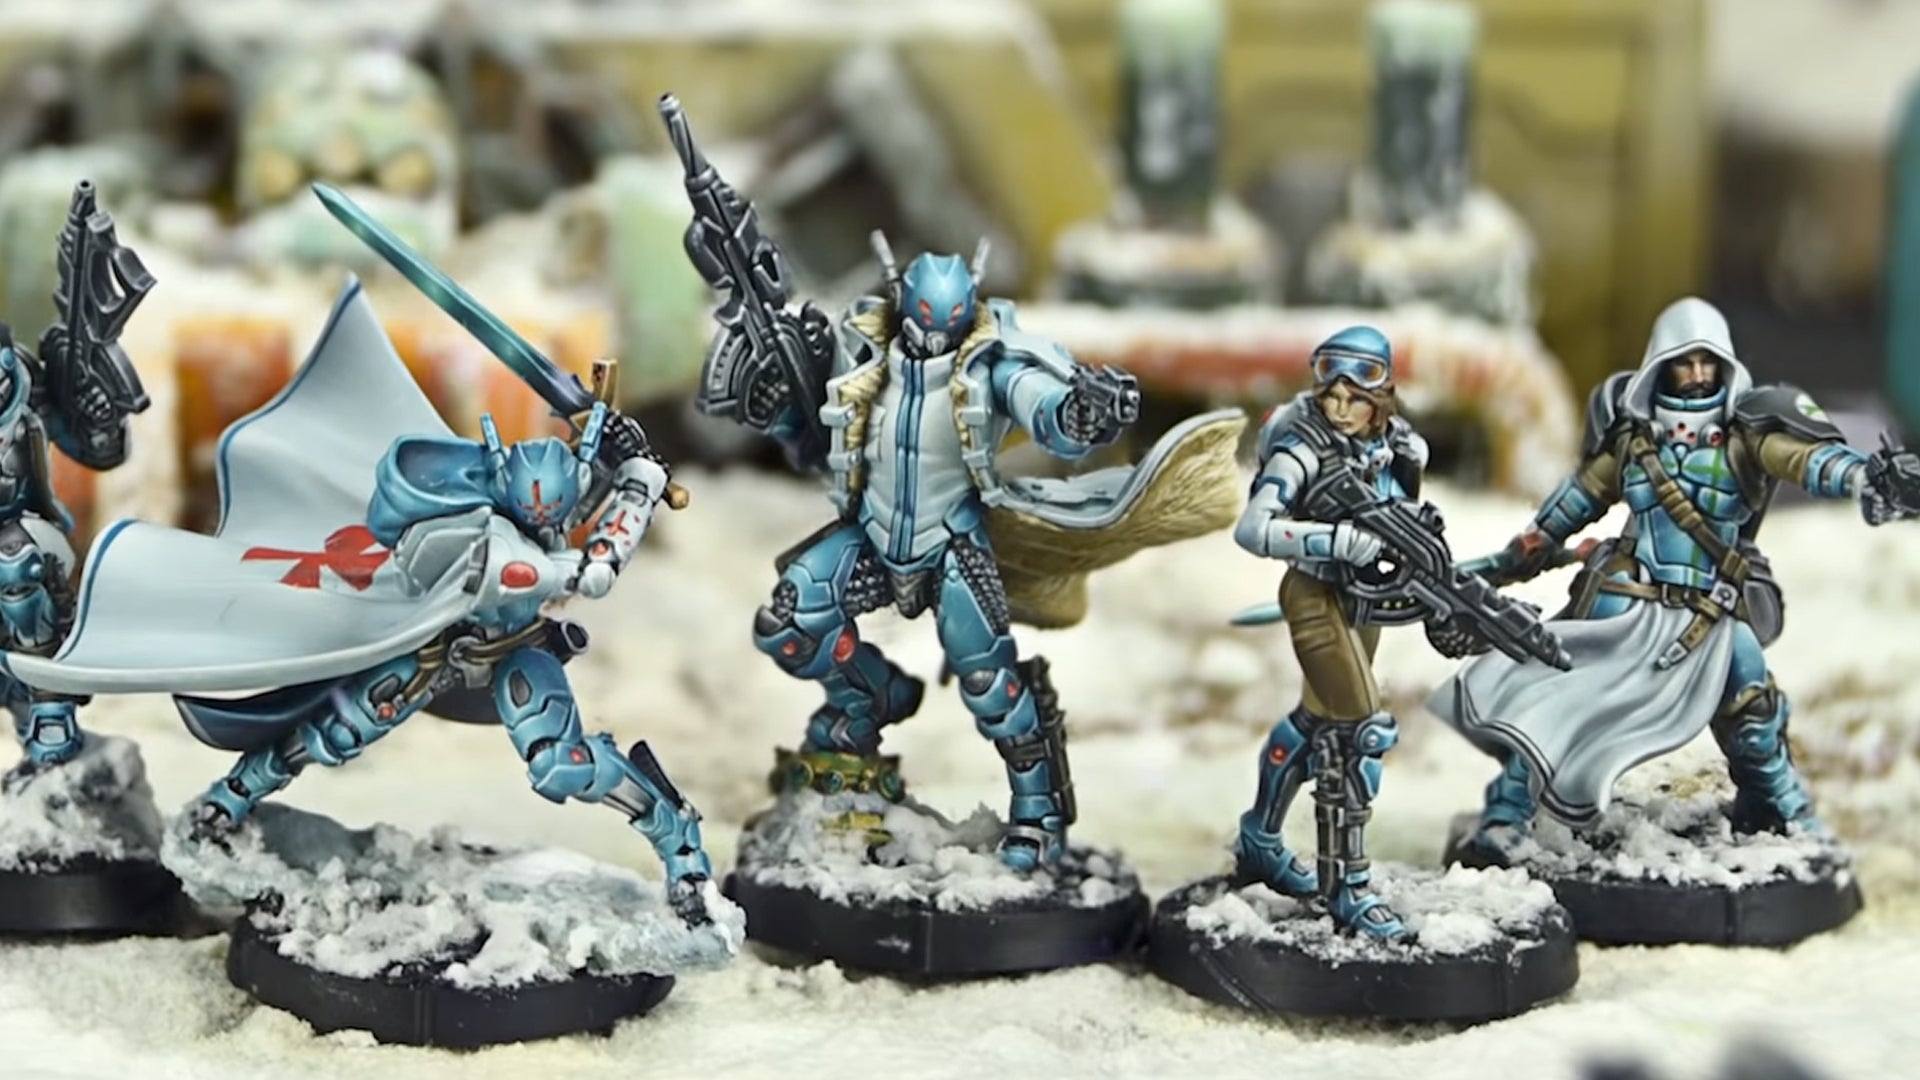 Image for Sci-fi miniatures game Infinity is getting a beginner friendly series titled CodeOne